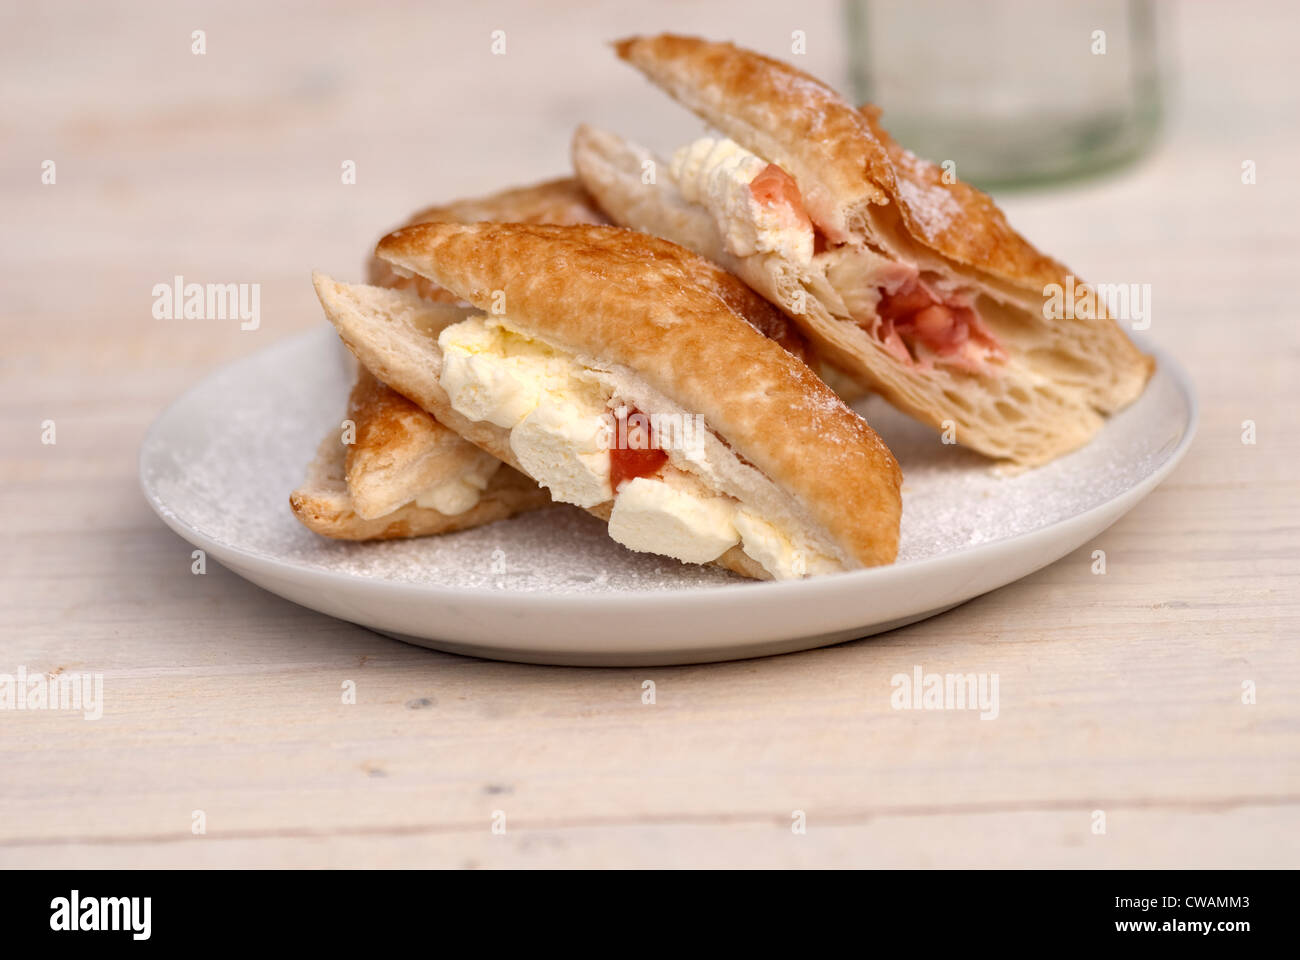 food photography of apple and strawberry cream turnover bun Stock Photo